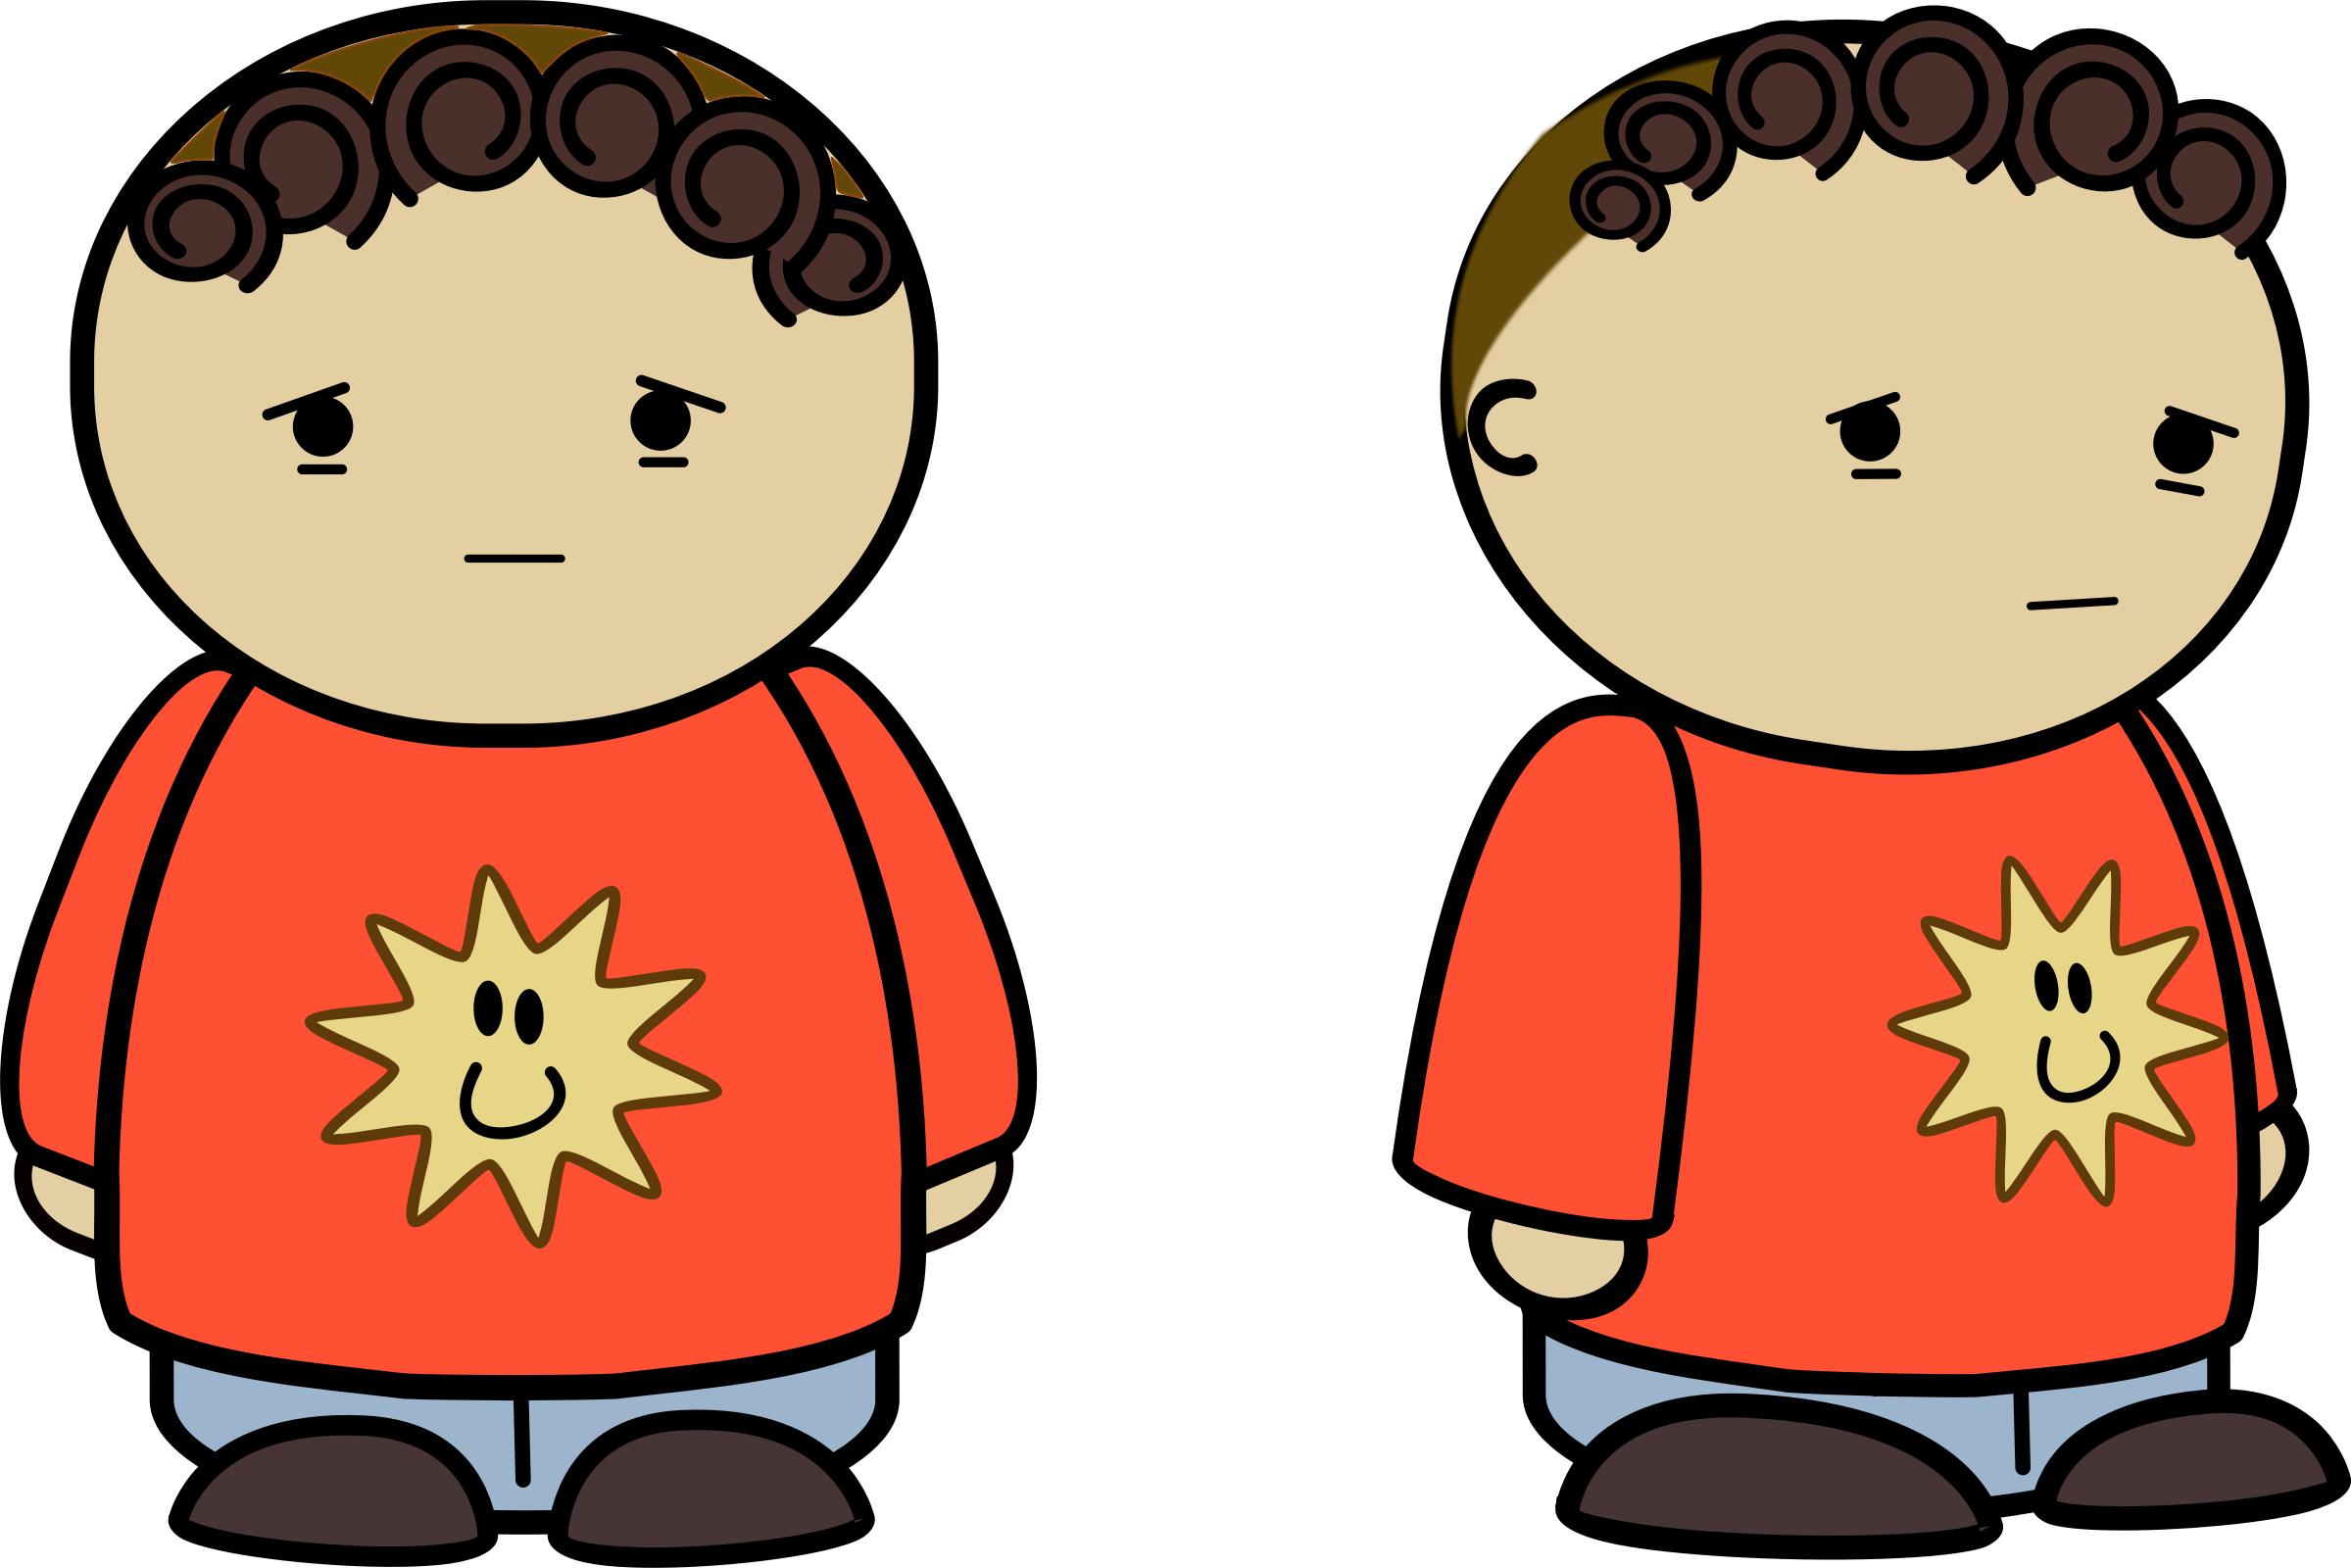 Miserable - Mix and math comic character png